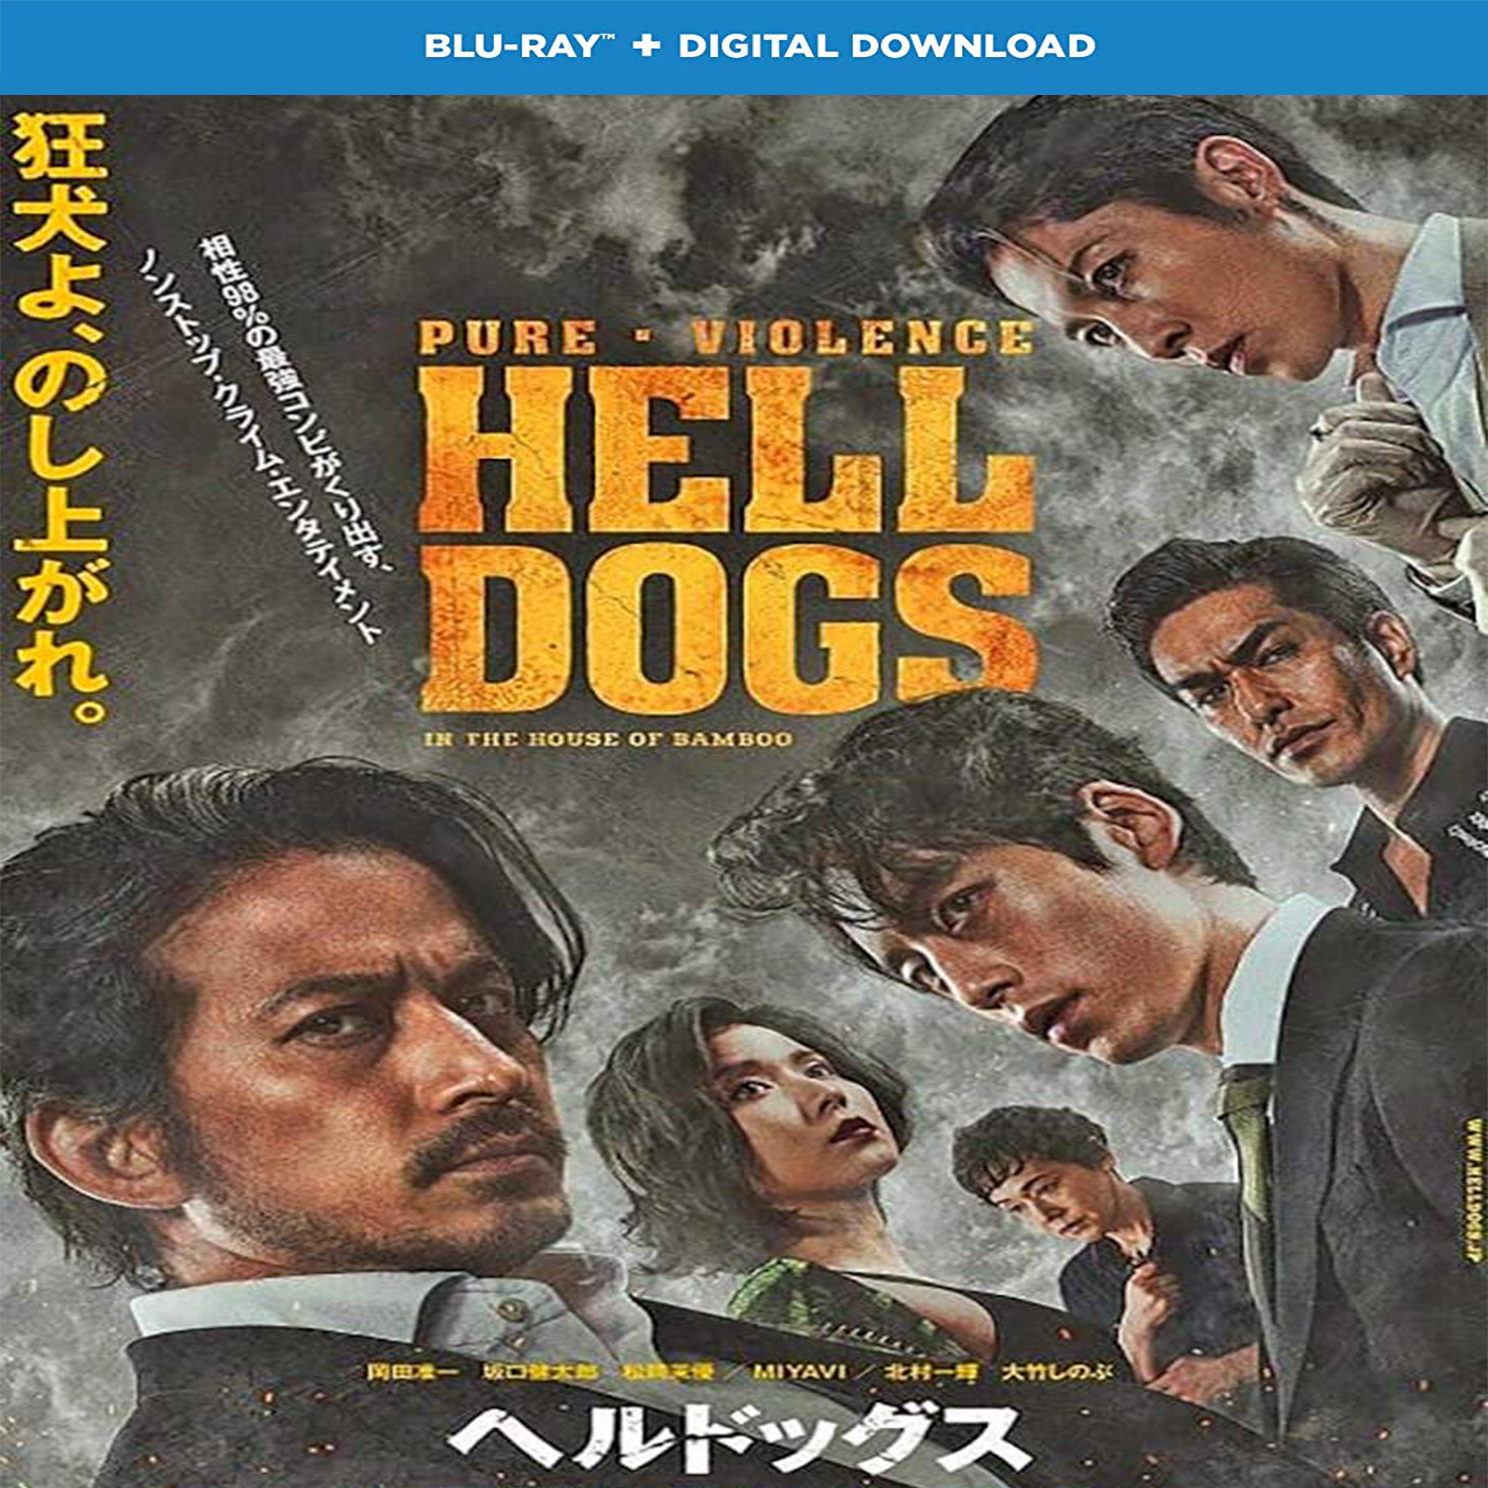 hell dogs movie review